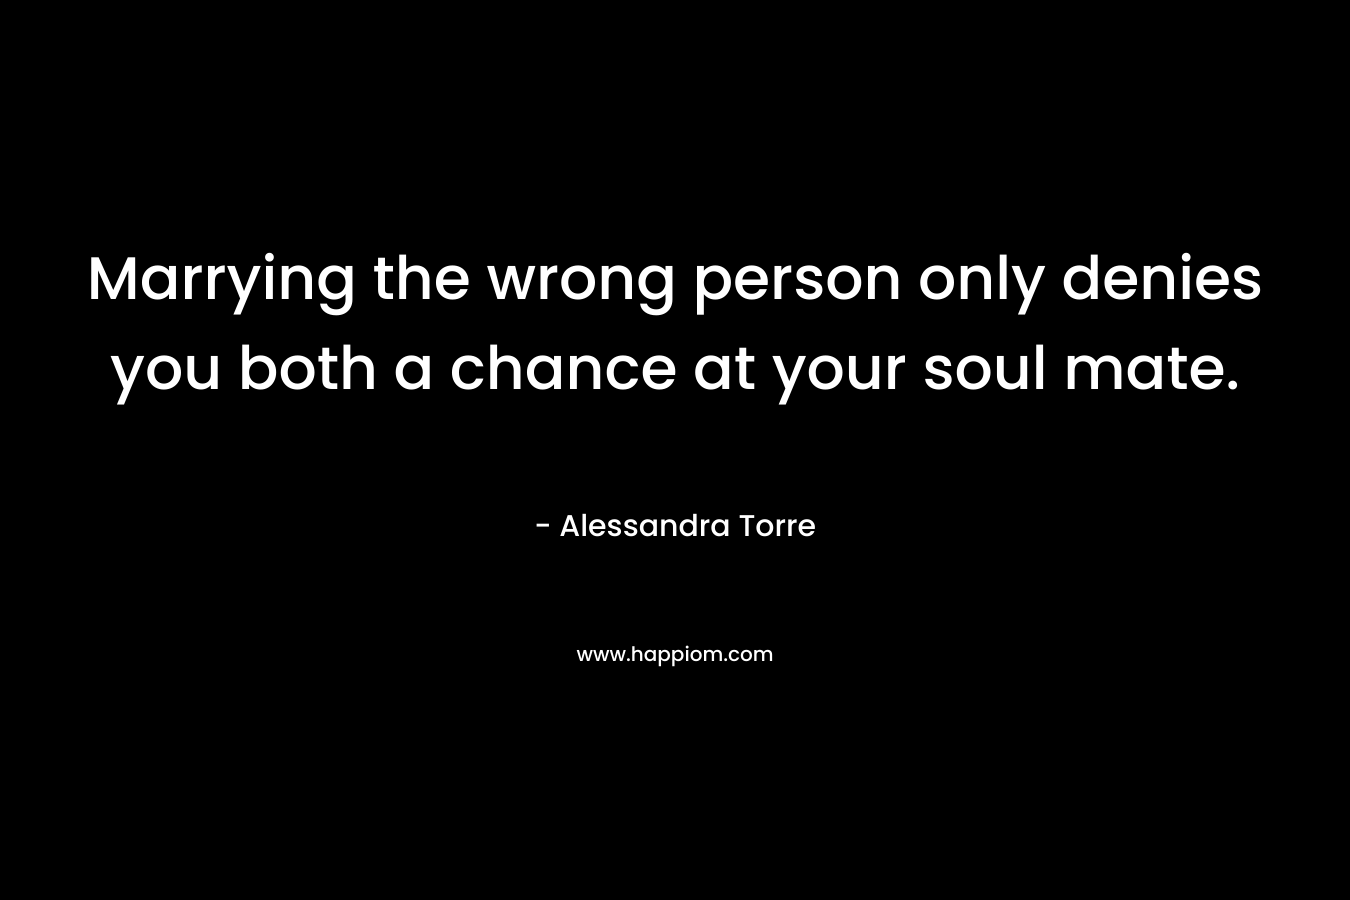 Marrying the wrong person only denies you both a chance at your soul mate. – Alessandra Torre